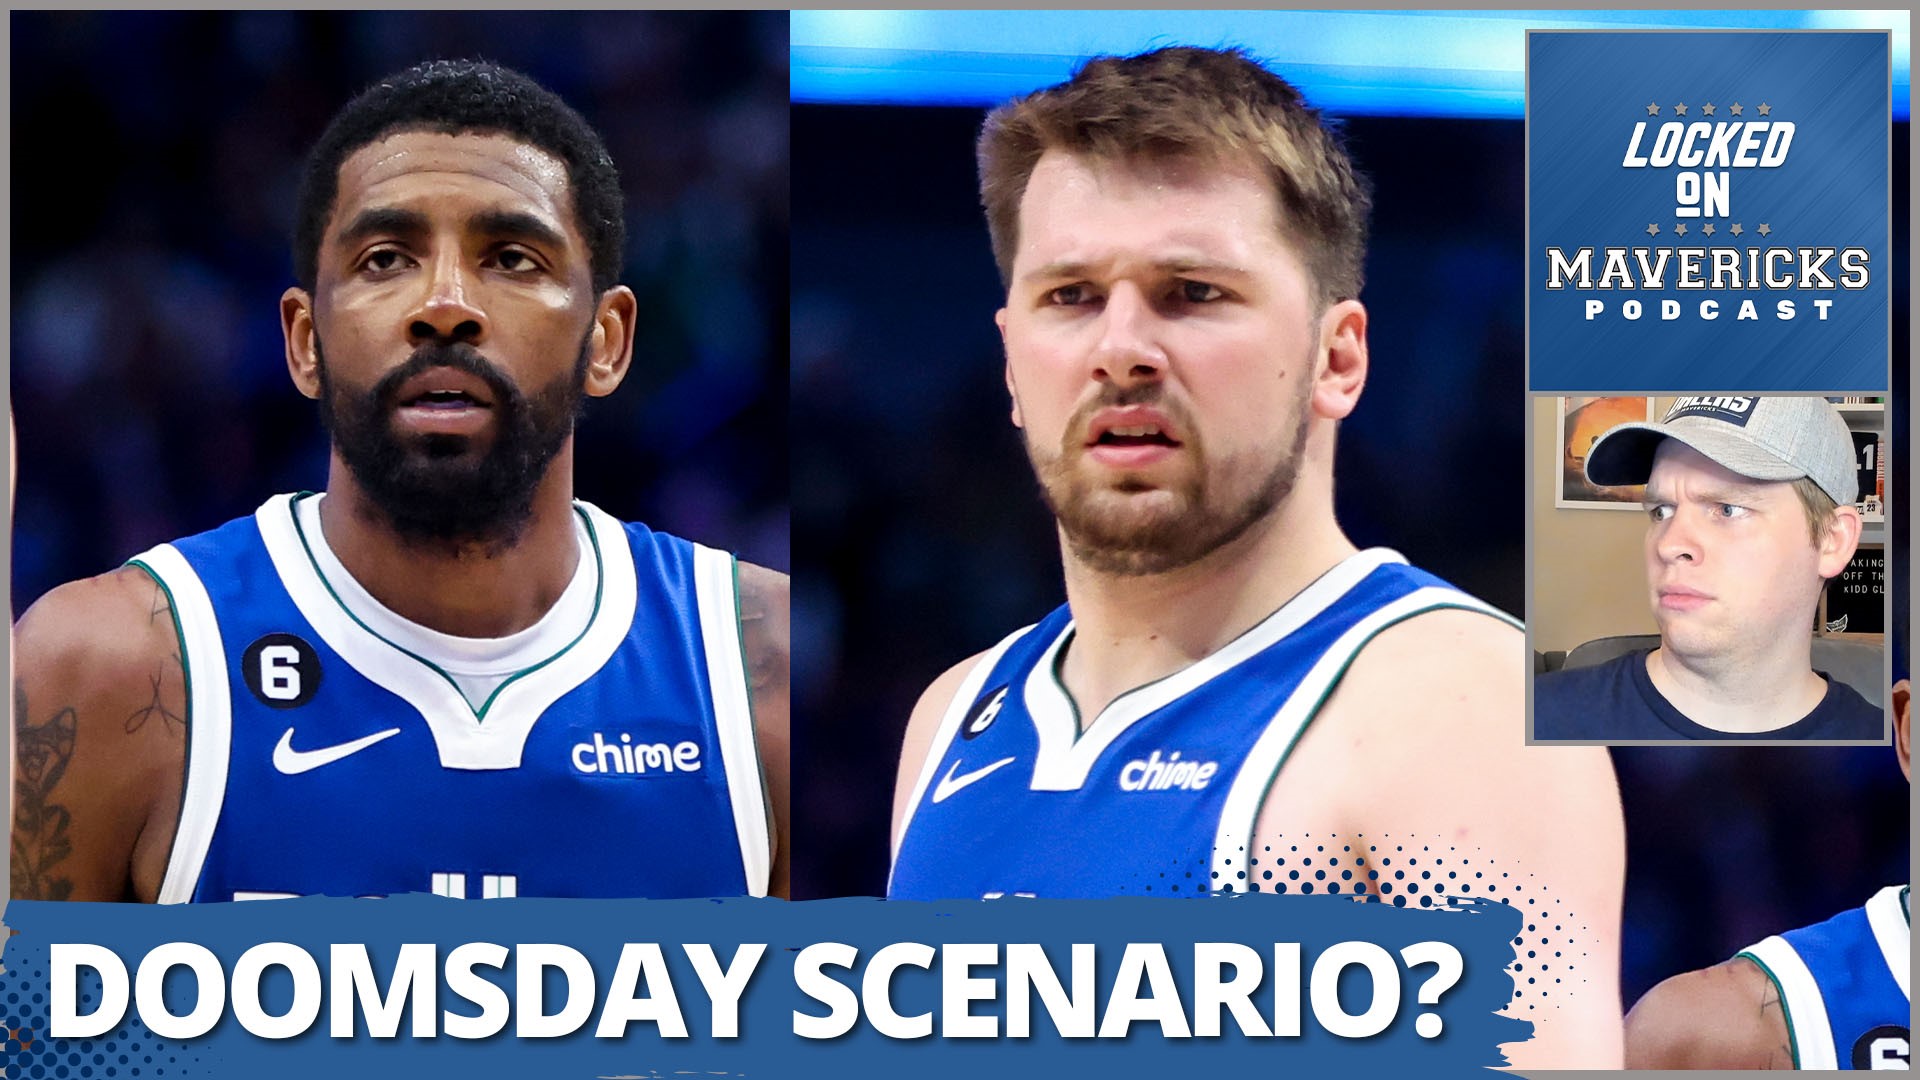 Nick Angstadt breaks down the Dallas Mavericks' Play-In chances and Draft Lottery Standings before an insanely conflicting game against the Chicago Bulls.